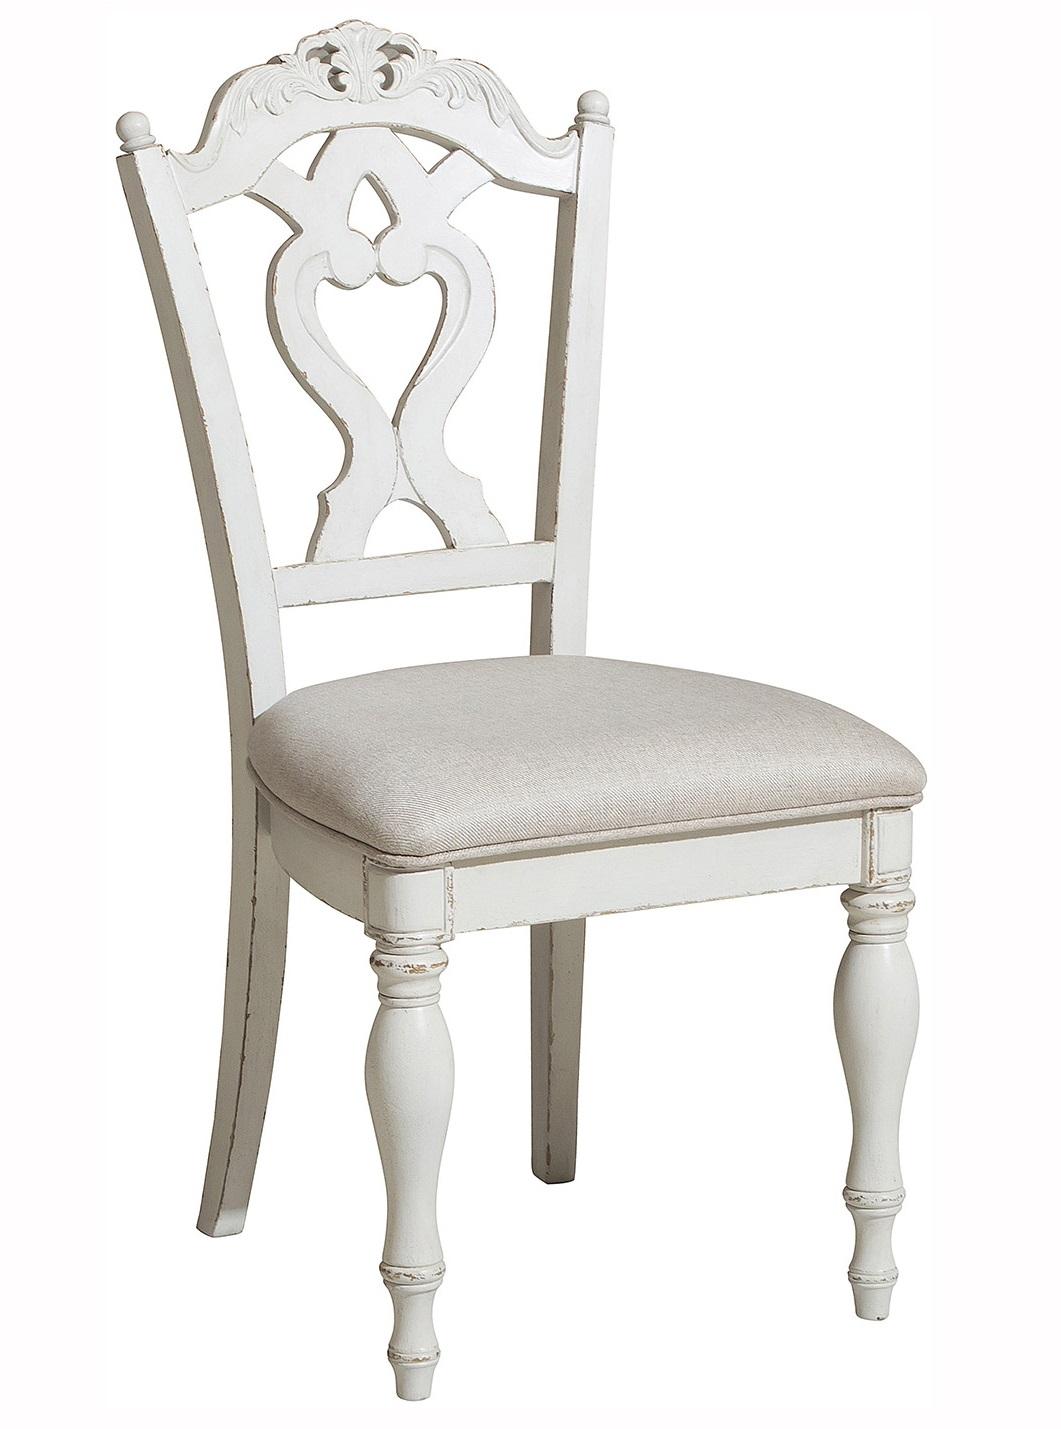 Homelegance Cinderella Chair in Antique White with Grey Rub-Through 1386NW-11C - Half Price Furniture